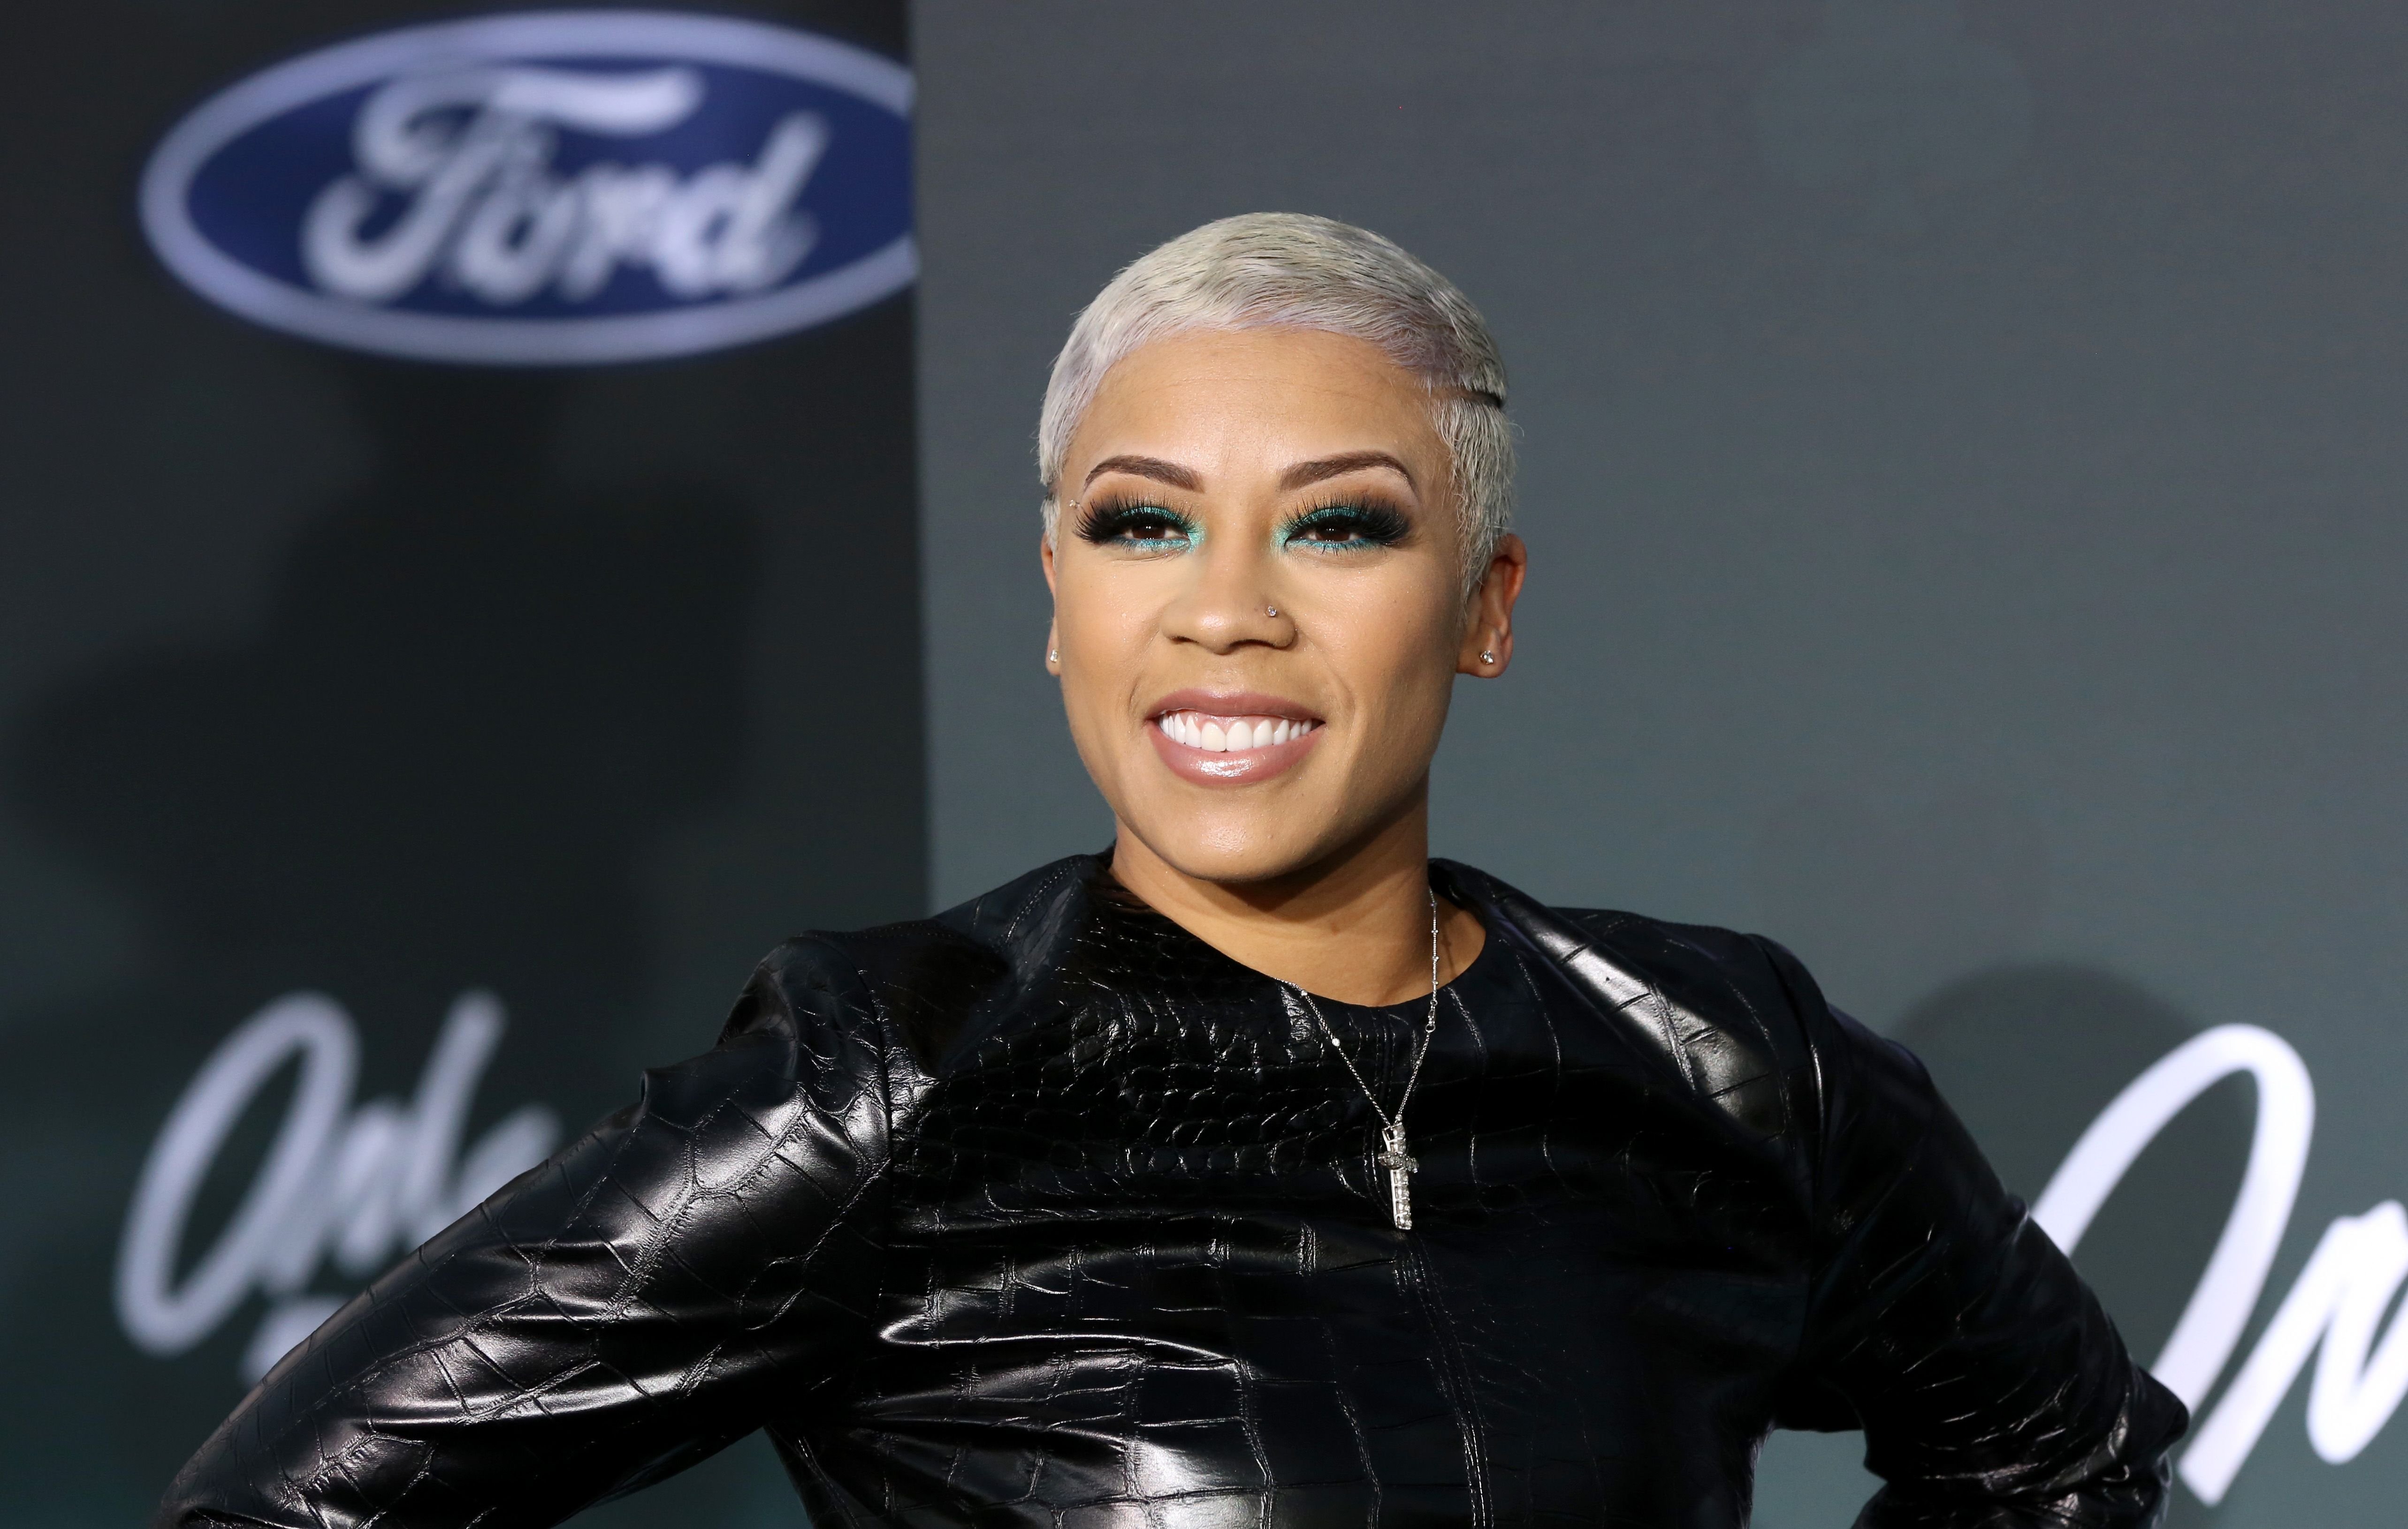 Keyshia Cole attends the 2019 Soul Train Awards at the Orleans Arena on November 17, 2019. | Source: Getty Images